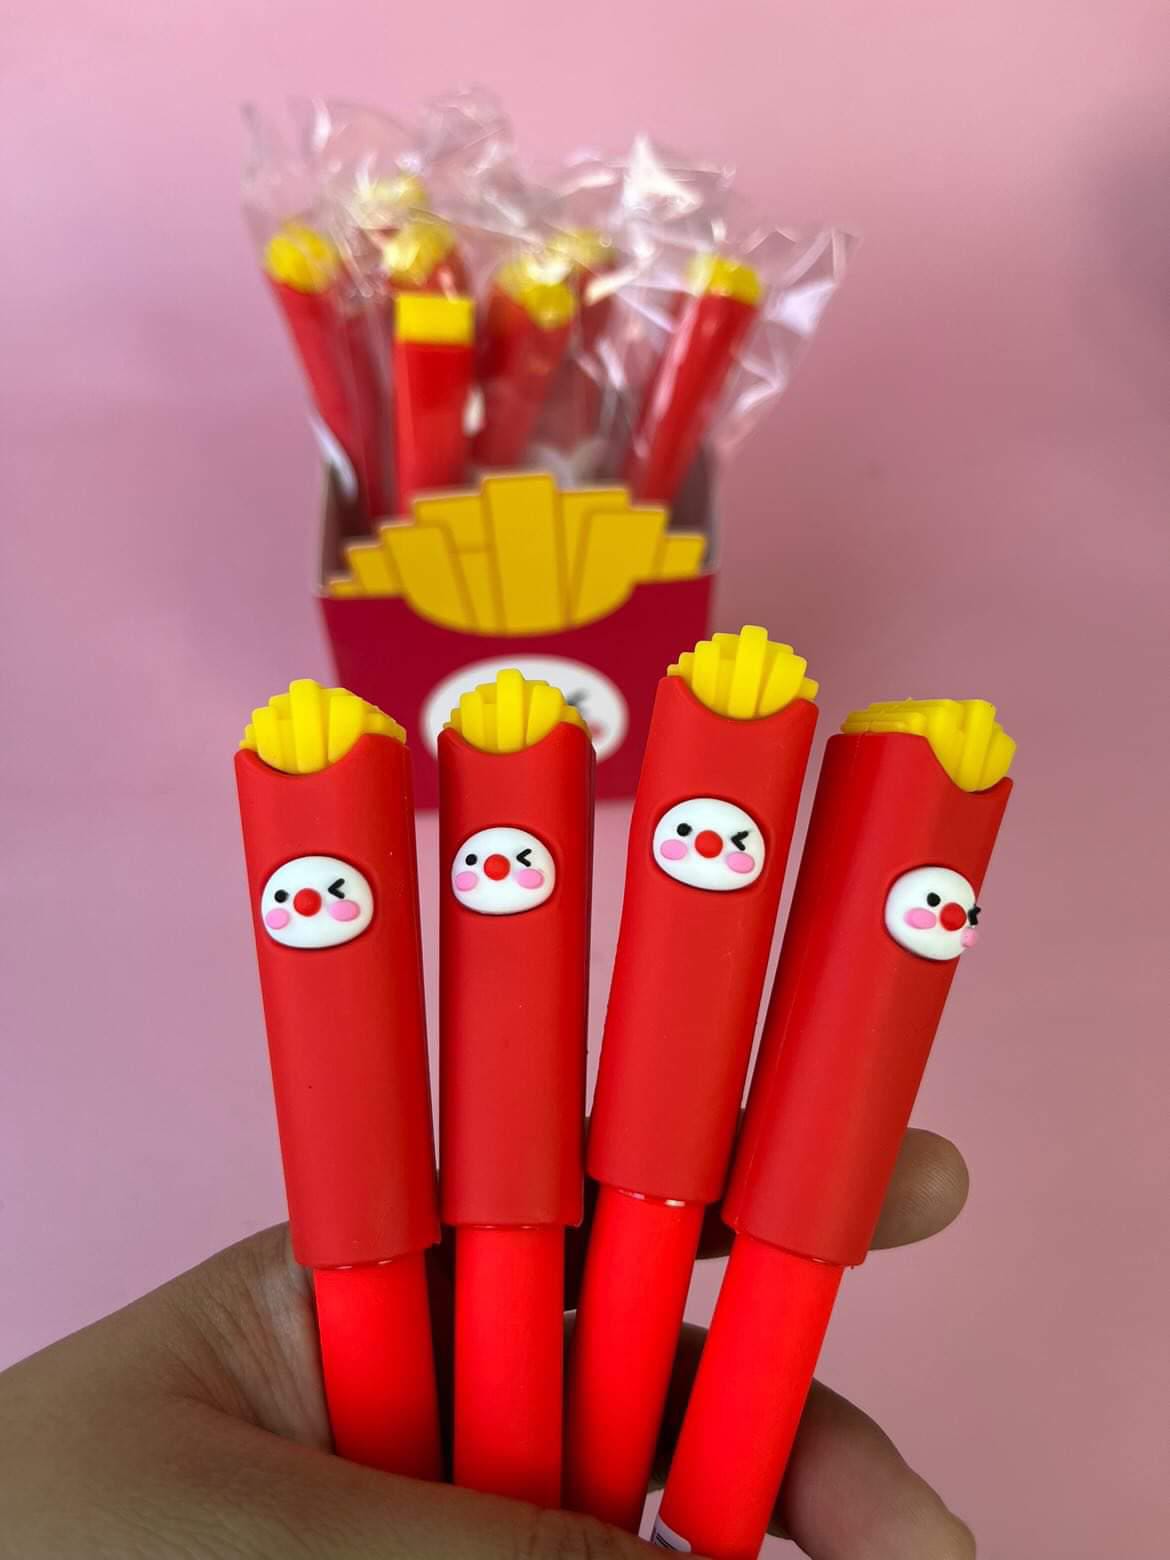 Fast Food Gel Ink-pens for Writing Cute Stationery Office School Supplies